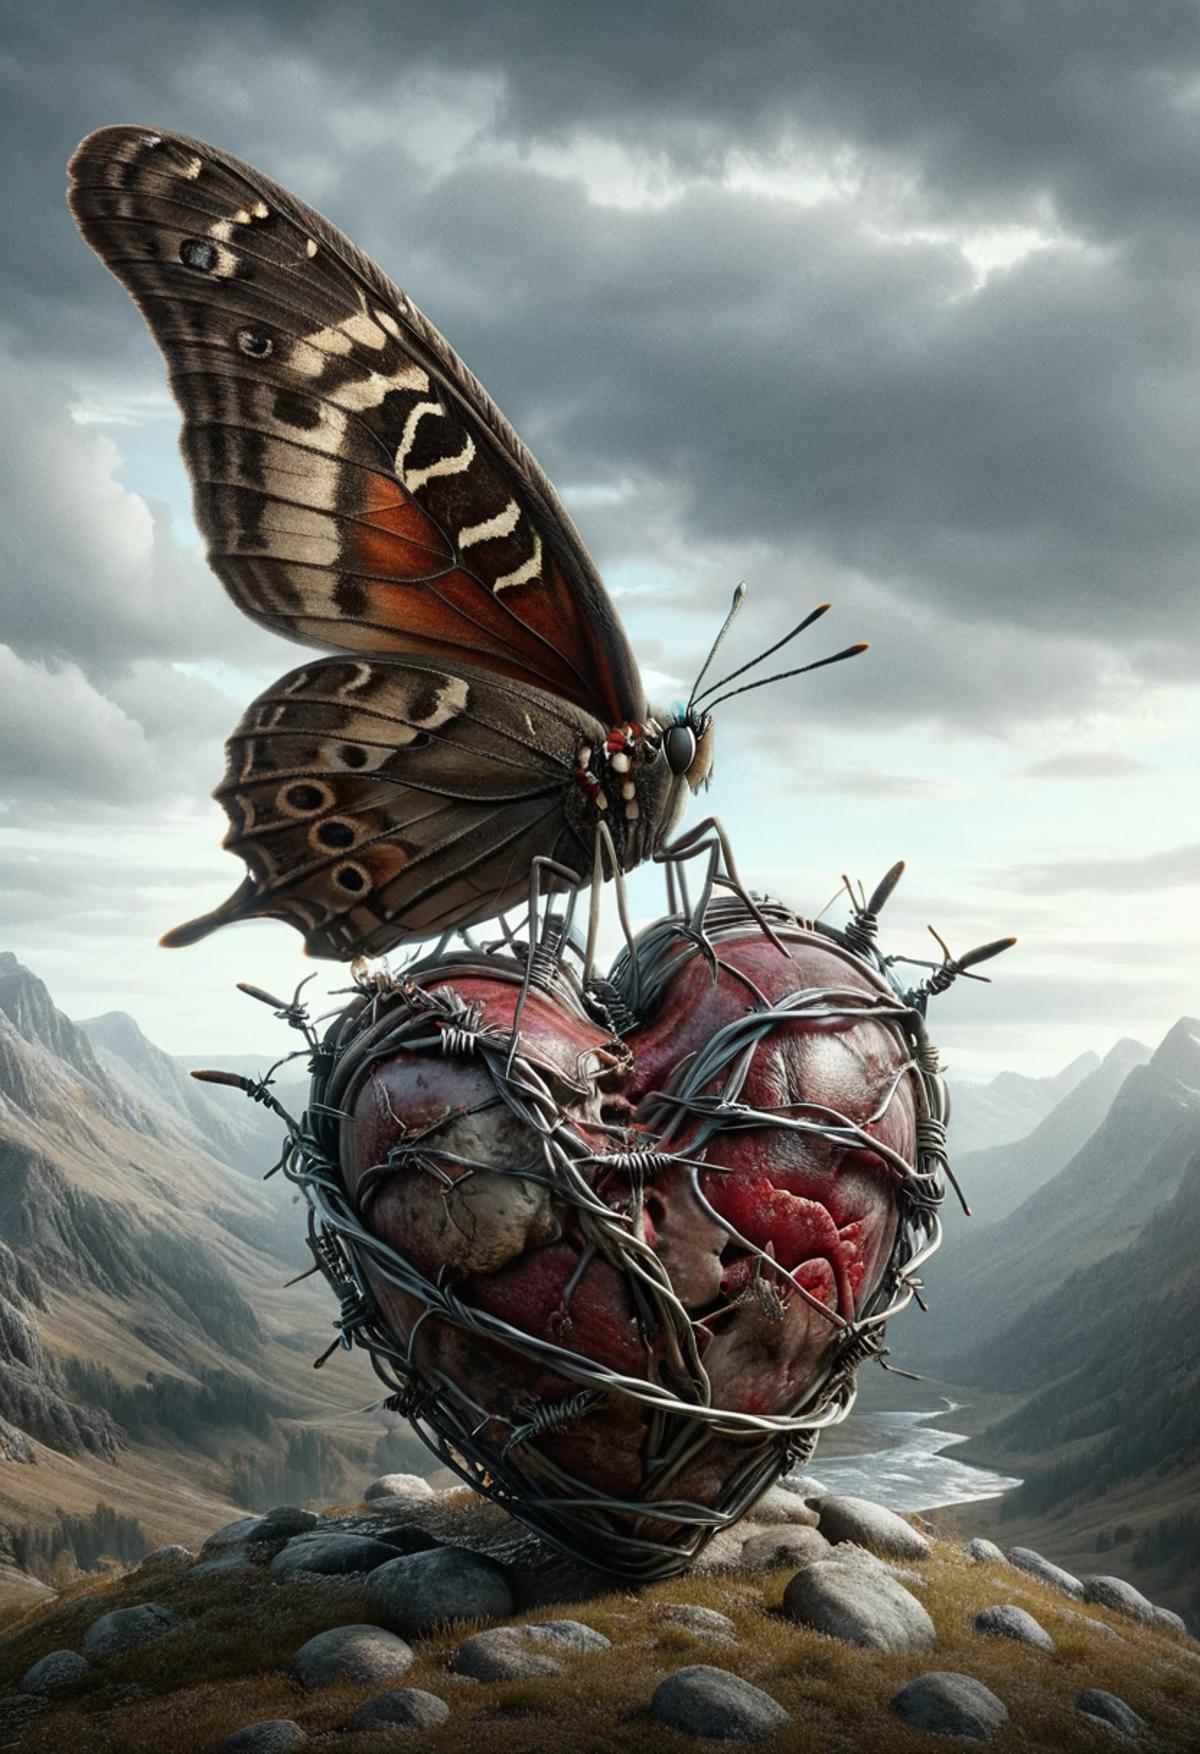 A butterfly is perched on a heart that is pierced with barbed wire.